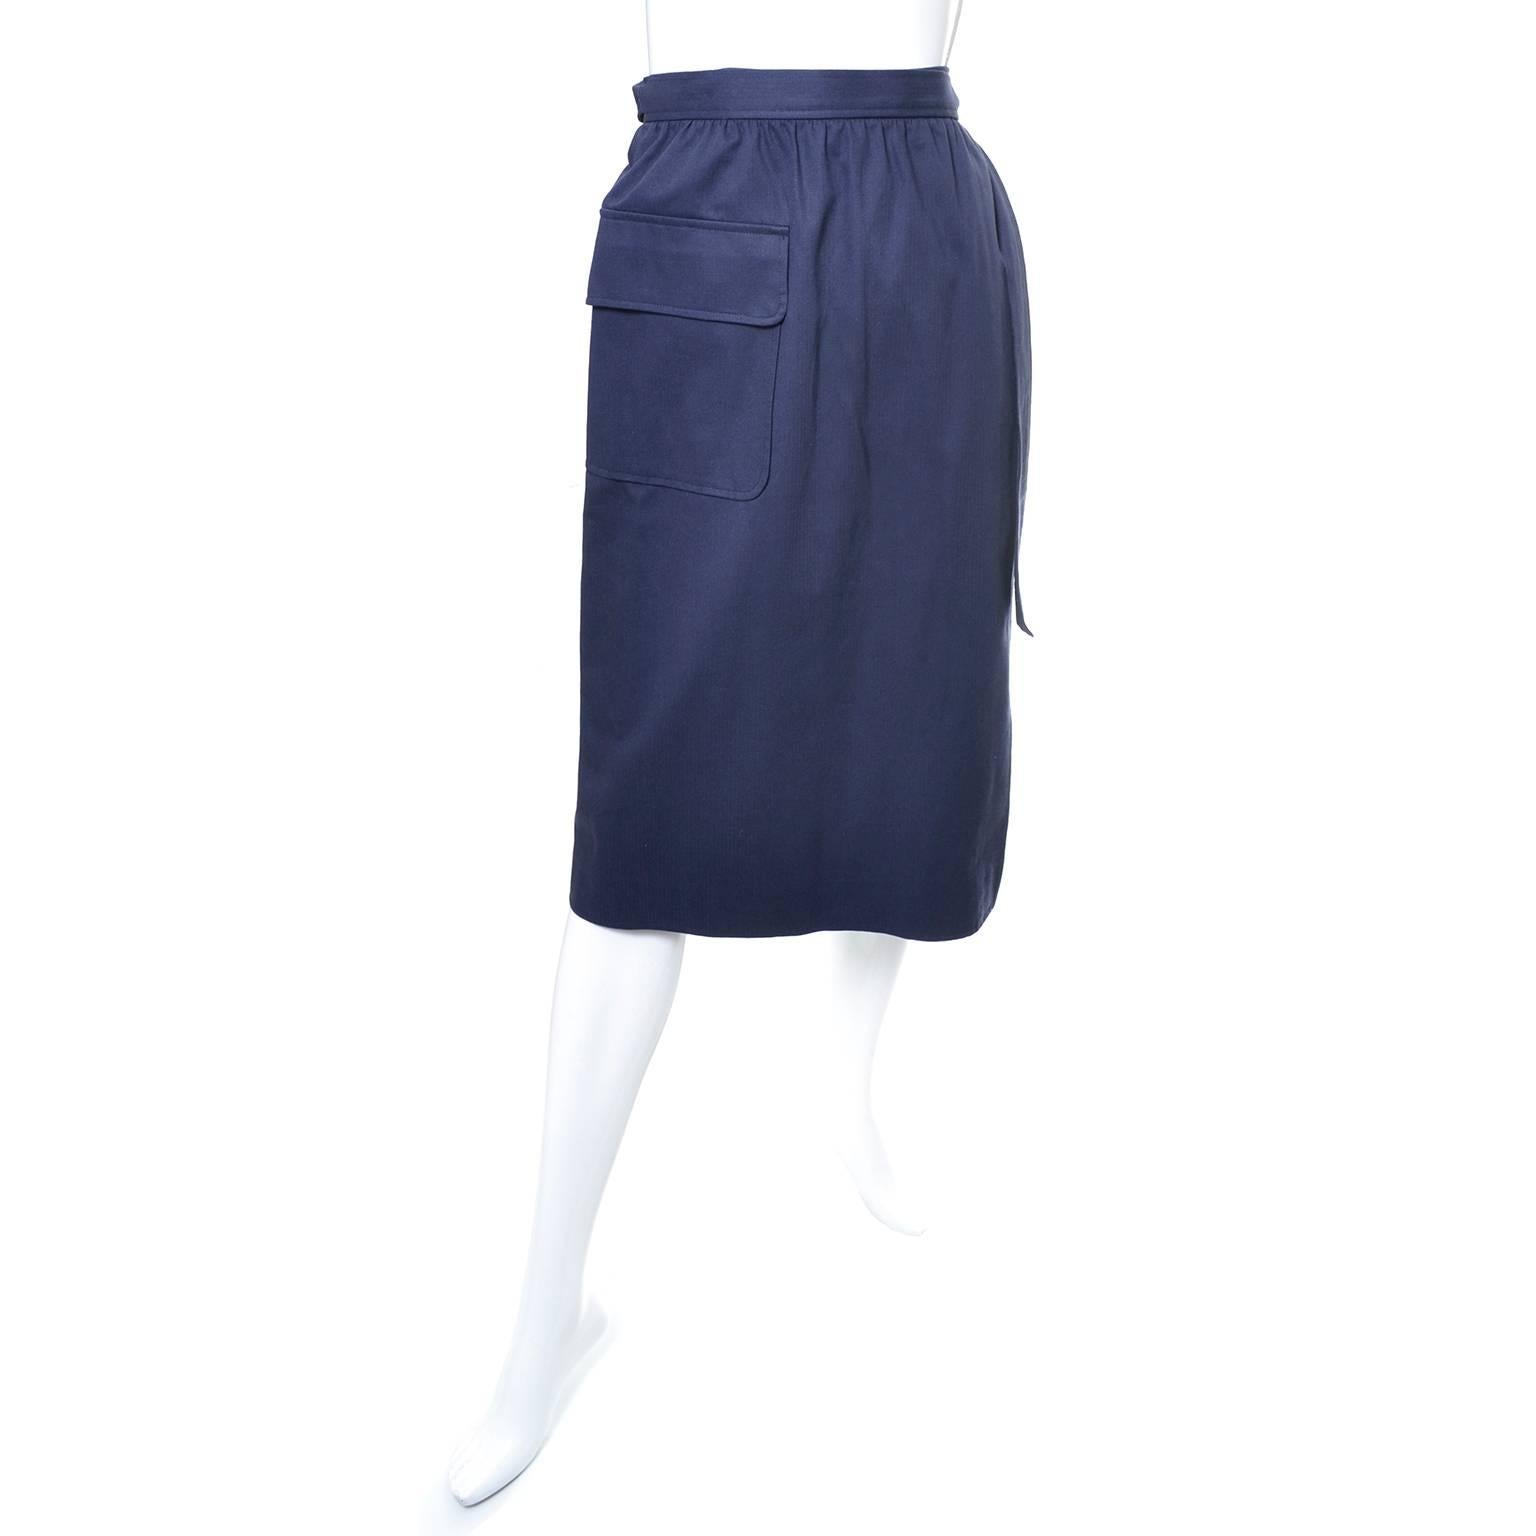 This vintage navy blue summer wrap skirt from YSL is from an incredible estate of vintage clothing that included many vintage Yves Saint Laurent pieces from the 1970's.  This skirt is in excellent condition and is labeled a French size 40 which is